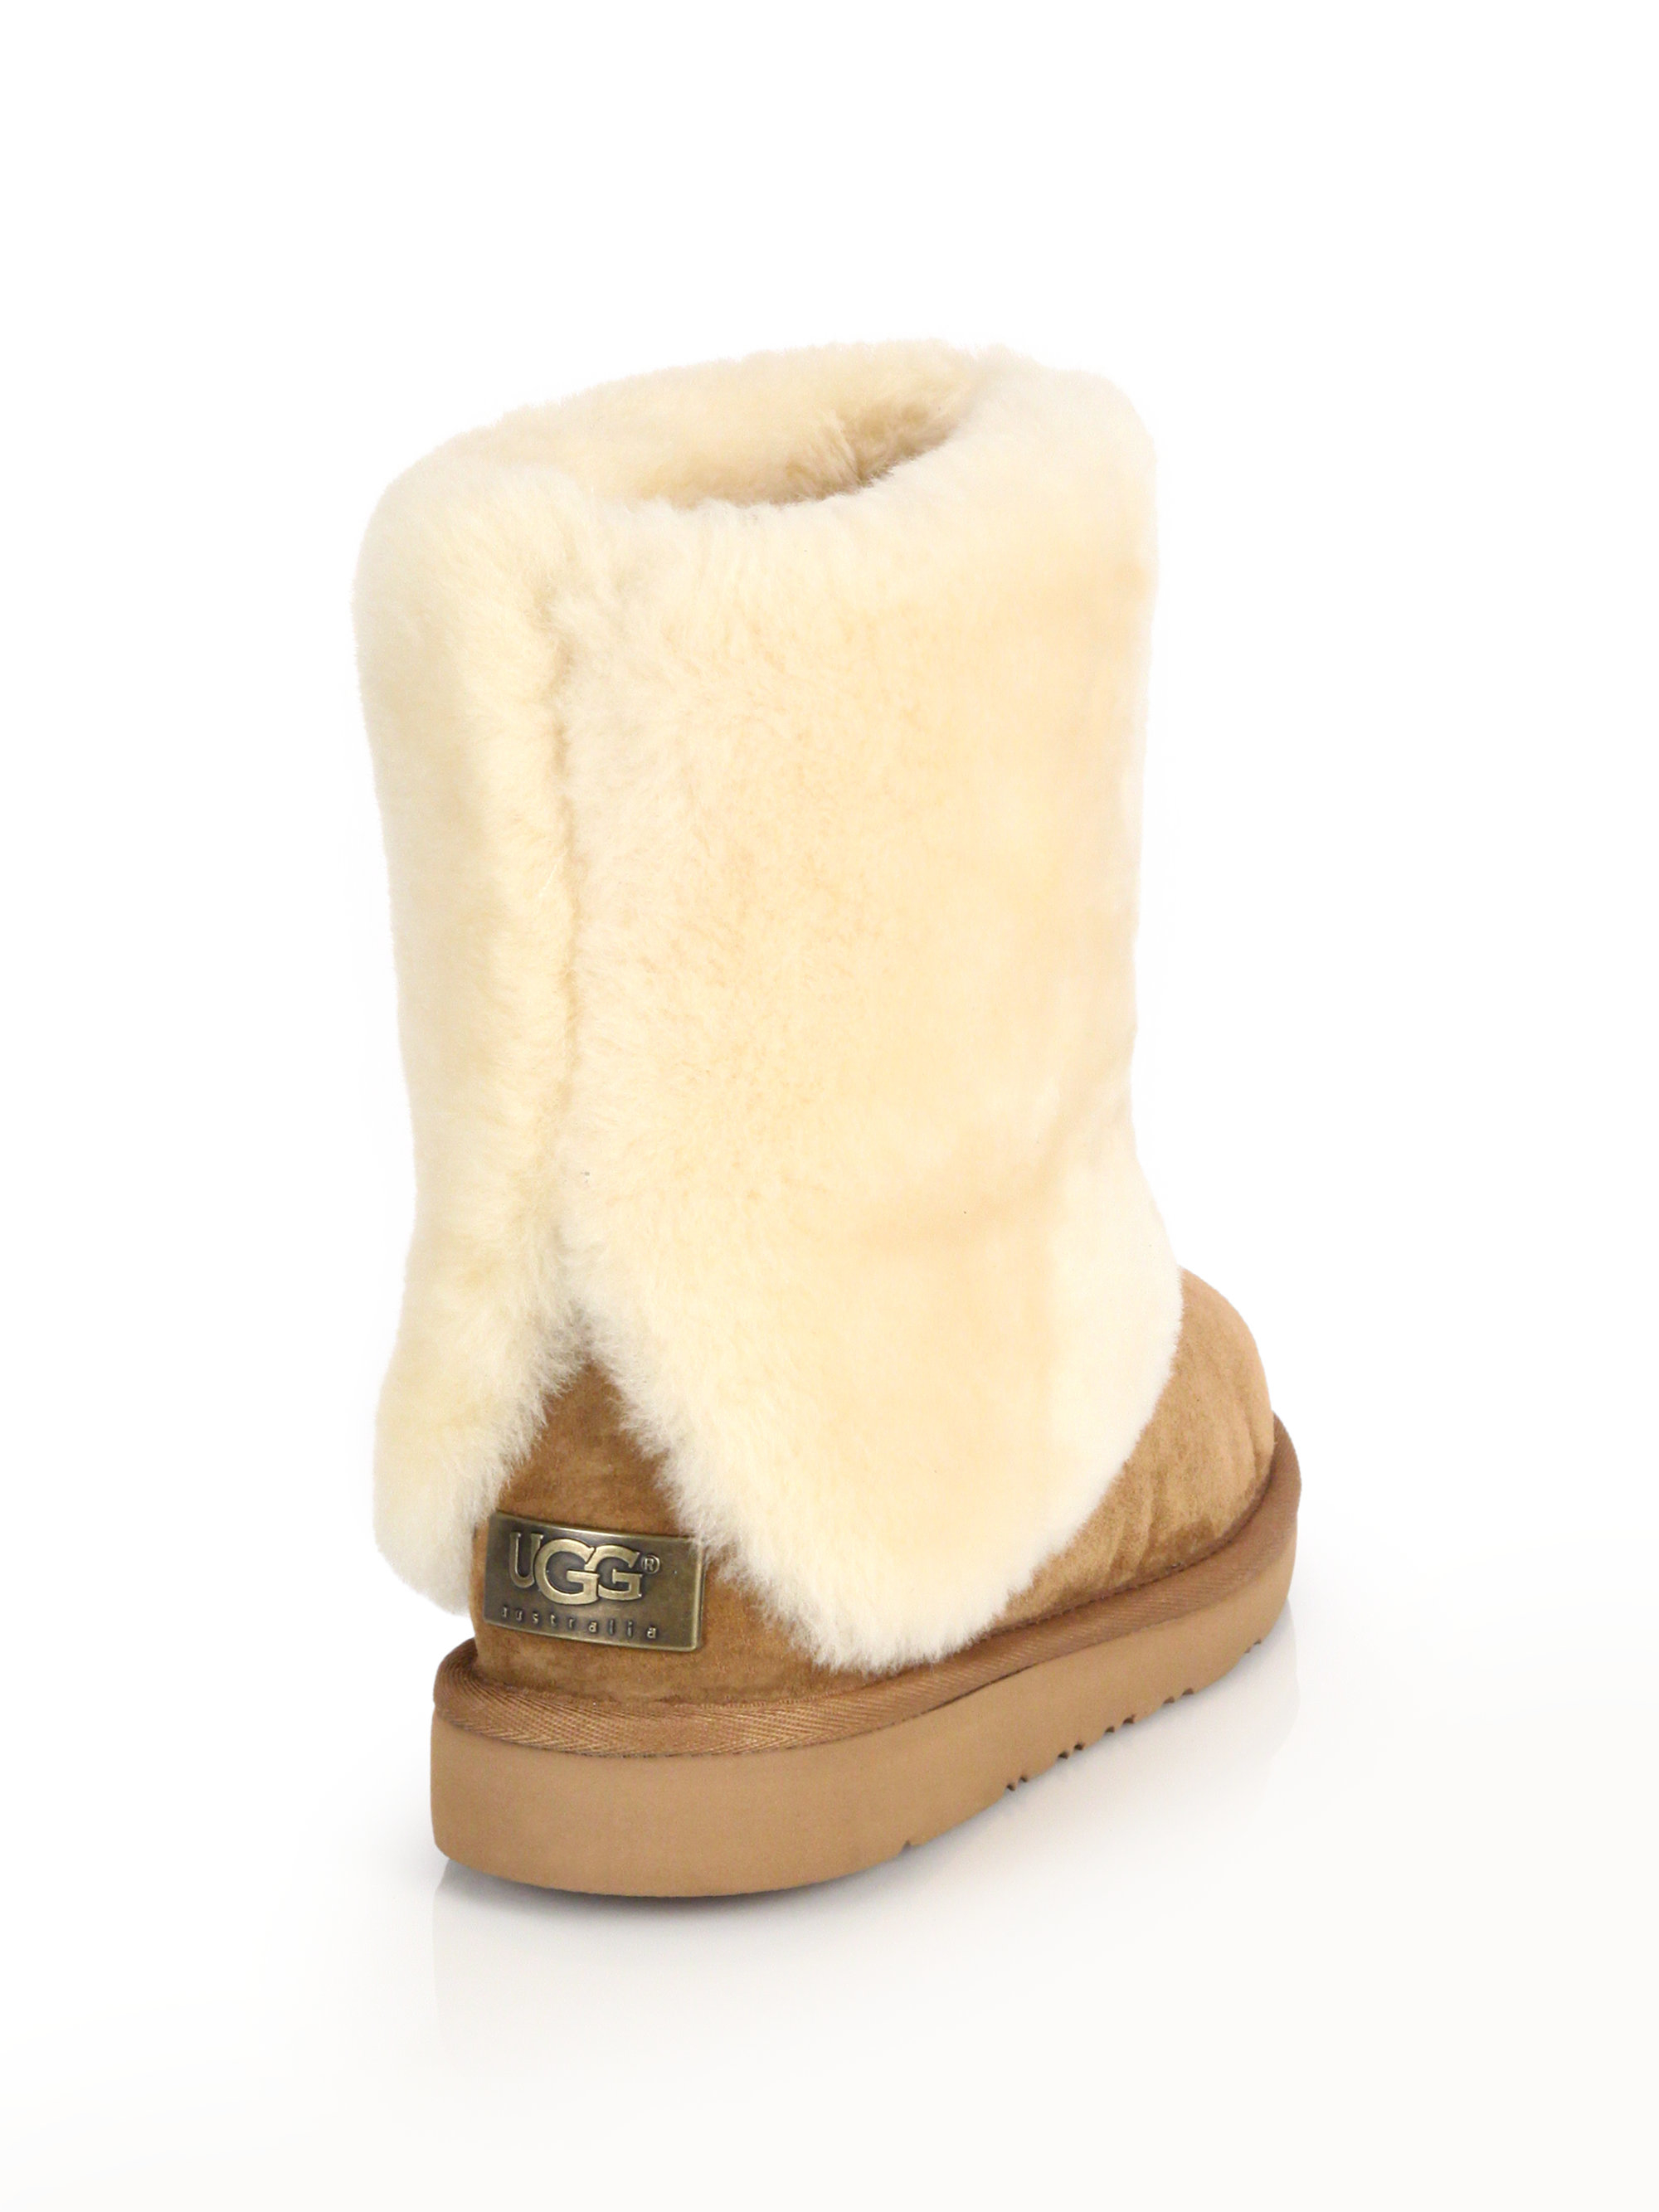 Lyst - Ugg Patten Shearling & Suede Boots in Brown